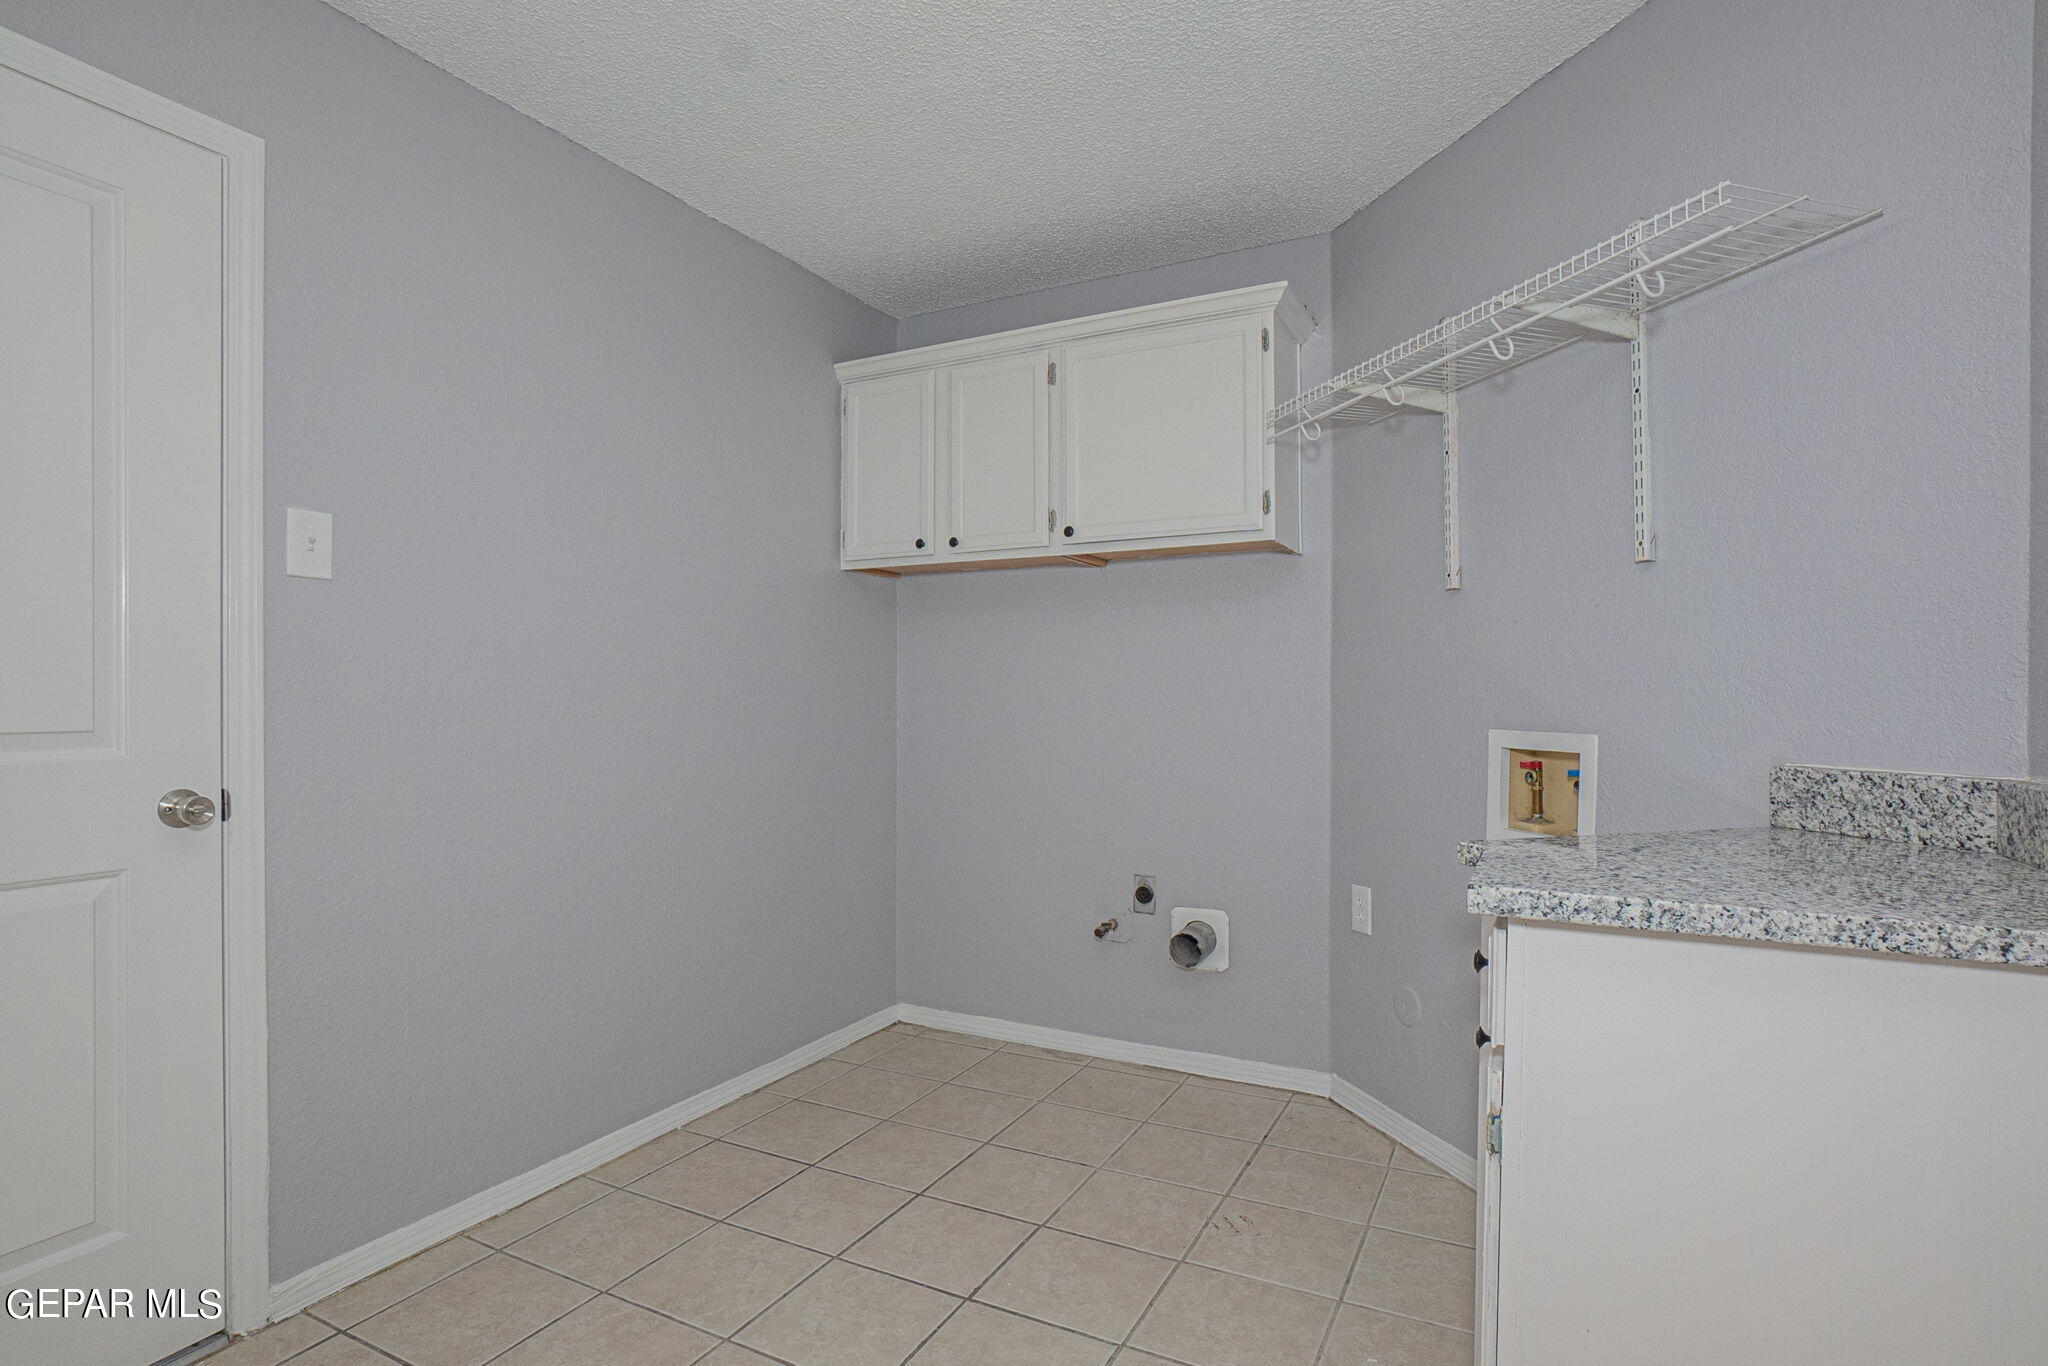 a room with cabinets